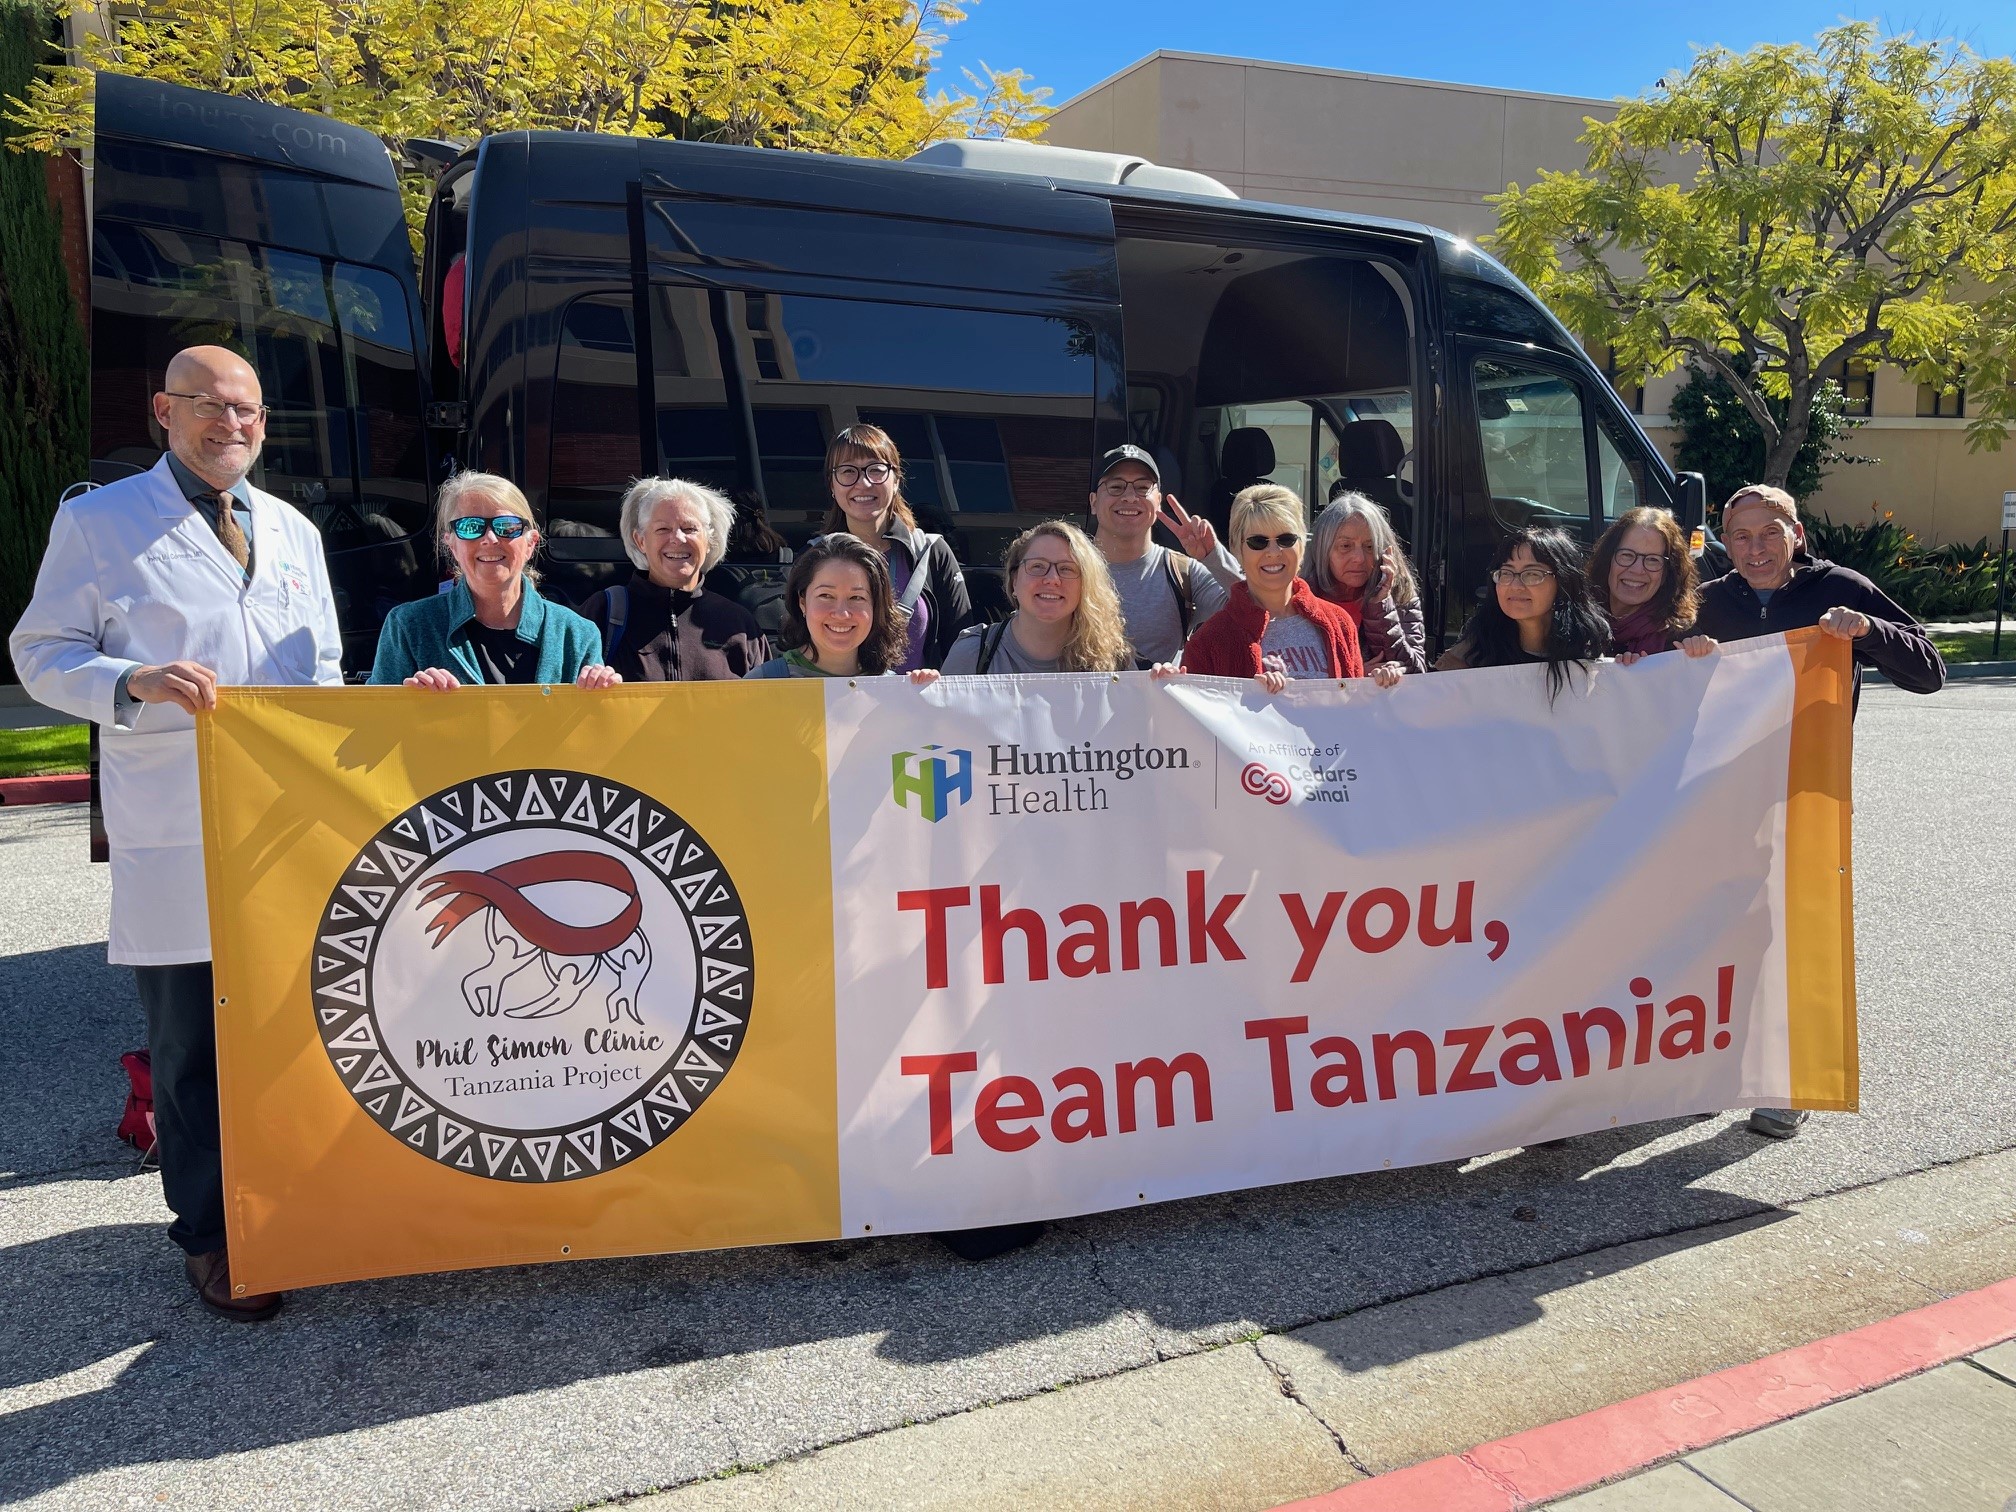 Team Tanzania returns to Africa to support the efforts of the Phil Simon Clinic Tanzania Project